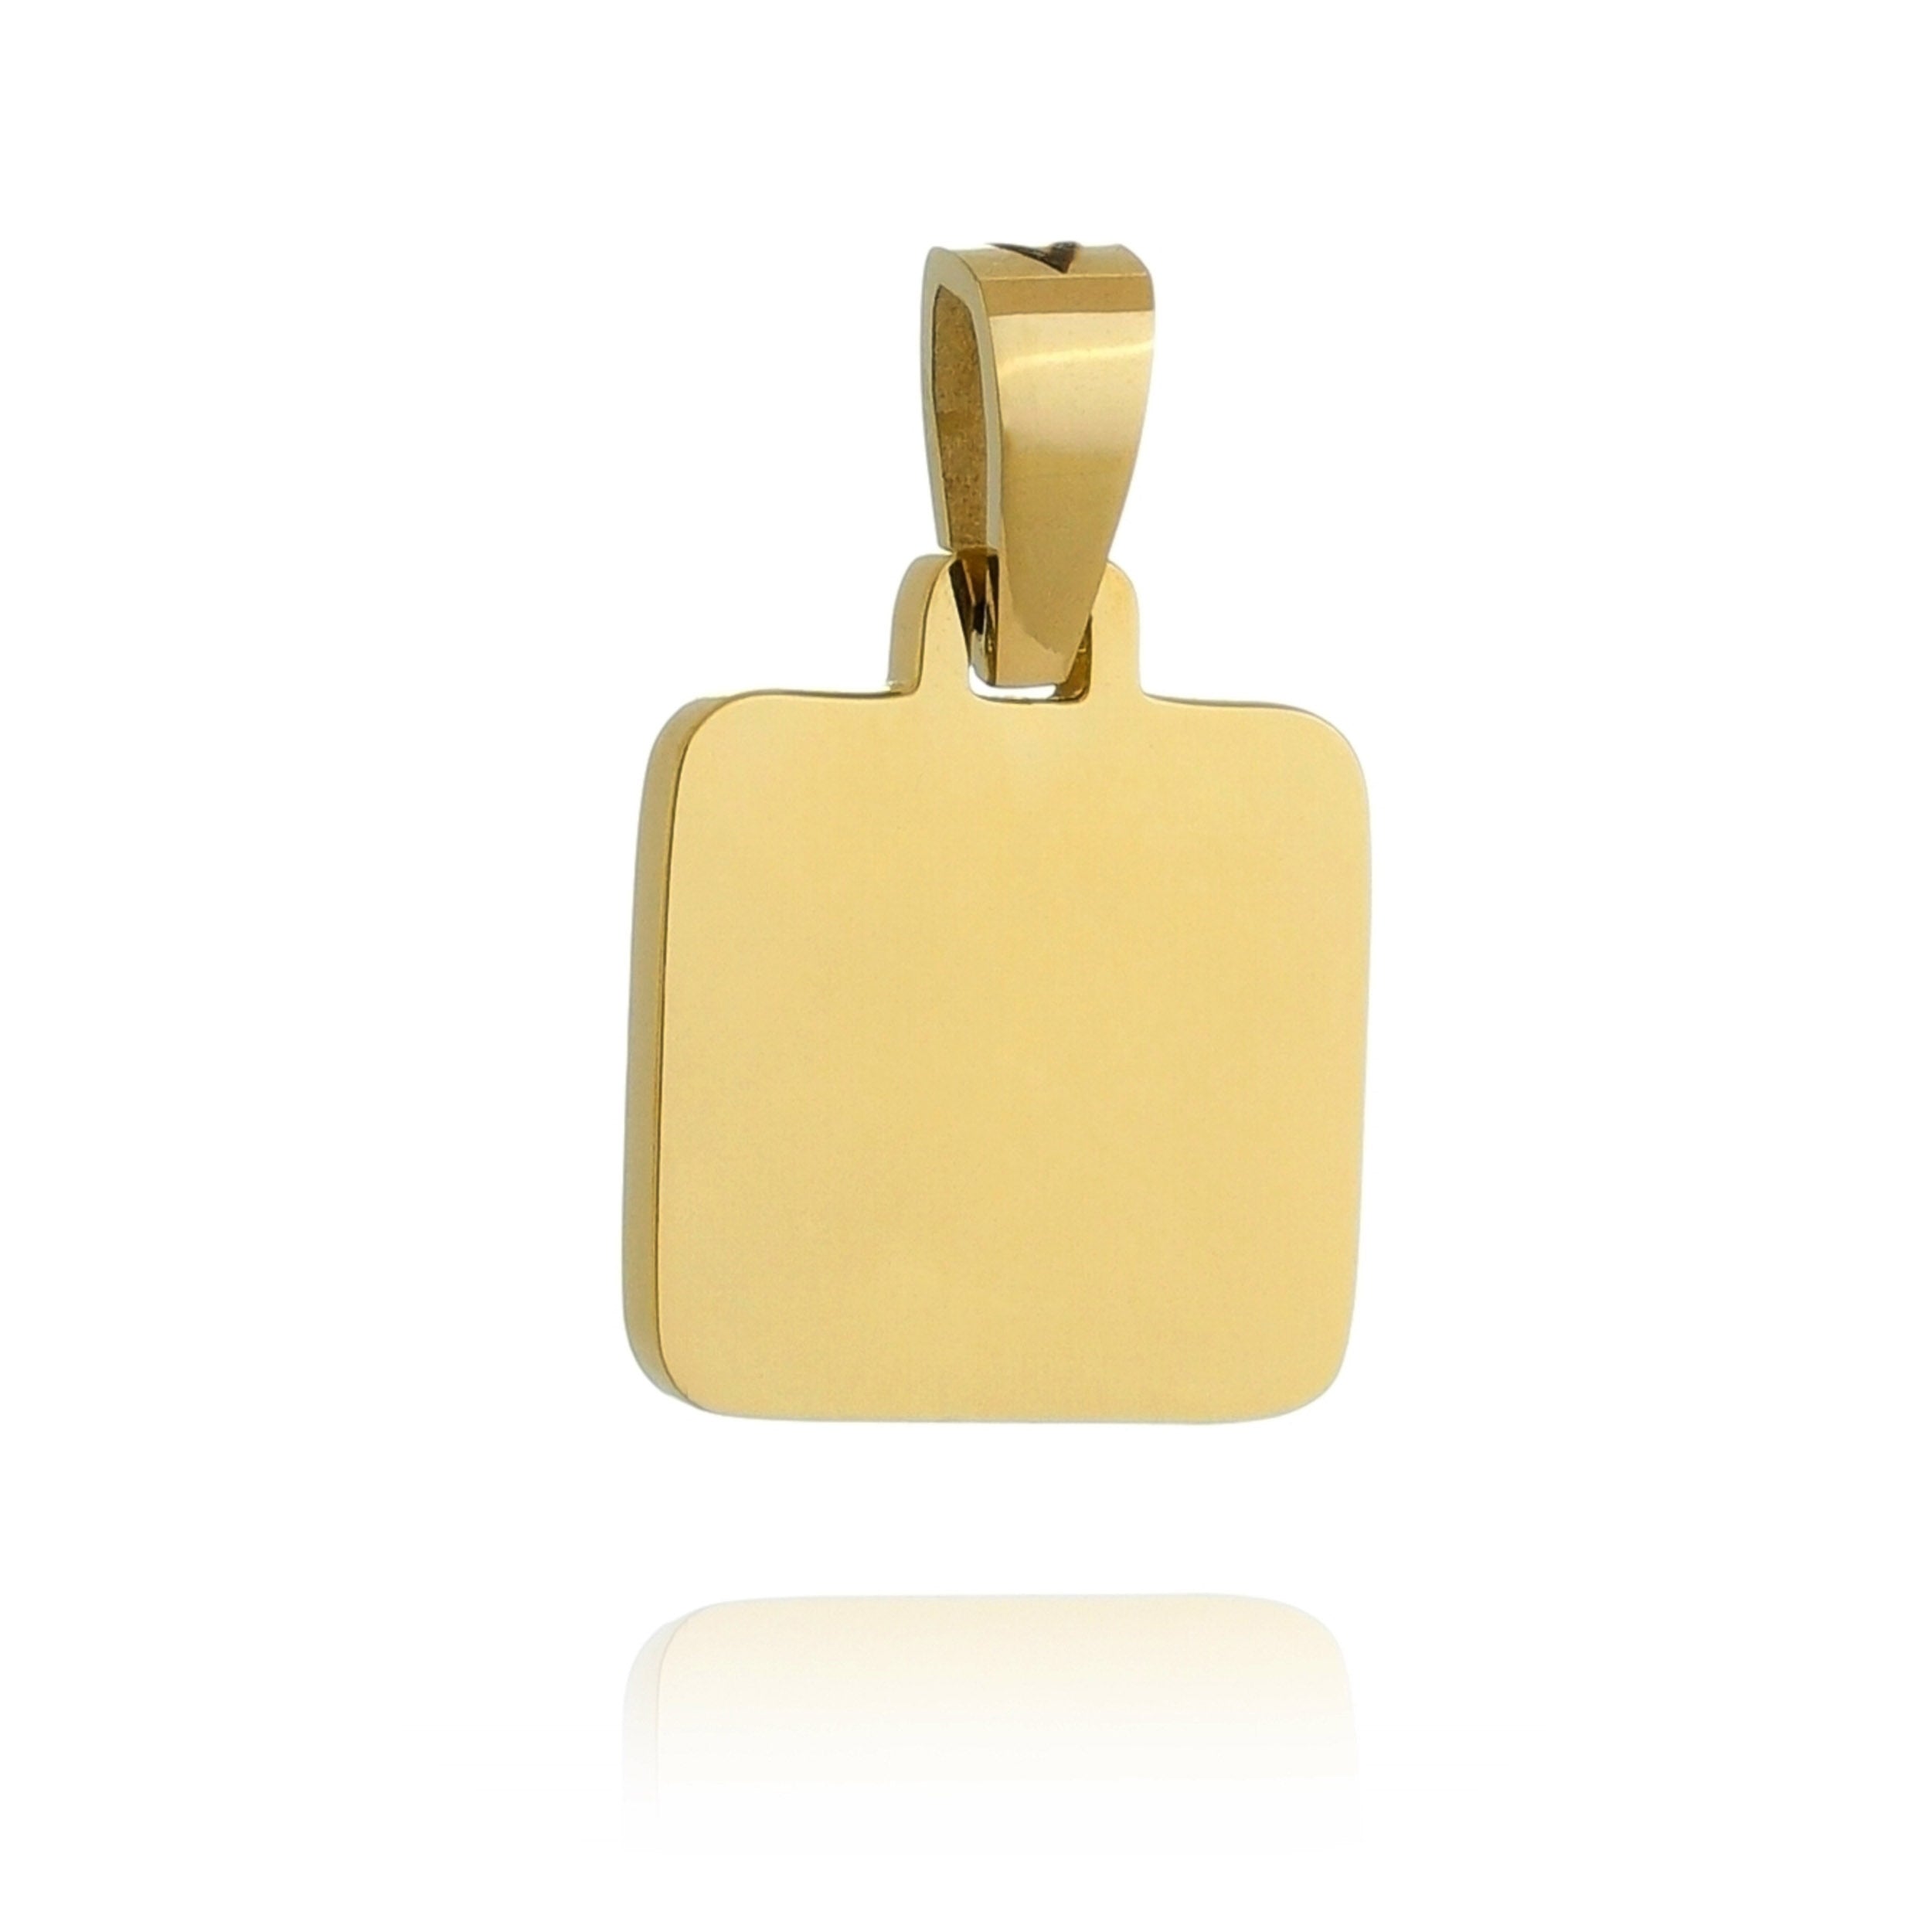 Engravable Square Pendent - Premium. We offer in both 18k Gold and Stainless Steel.